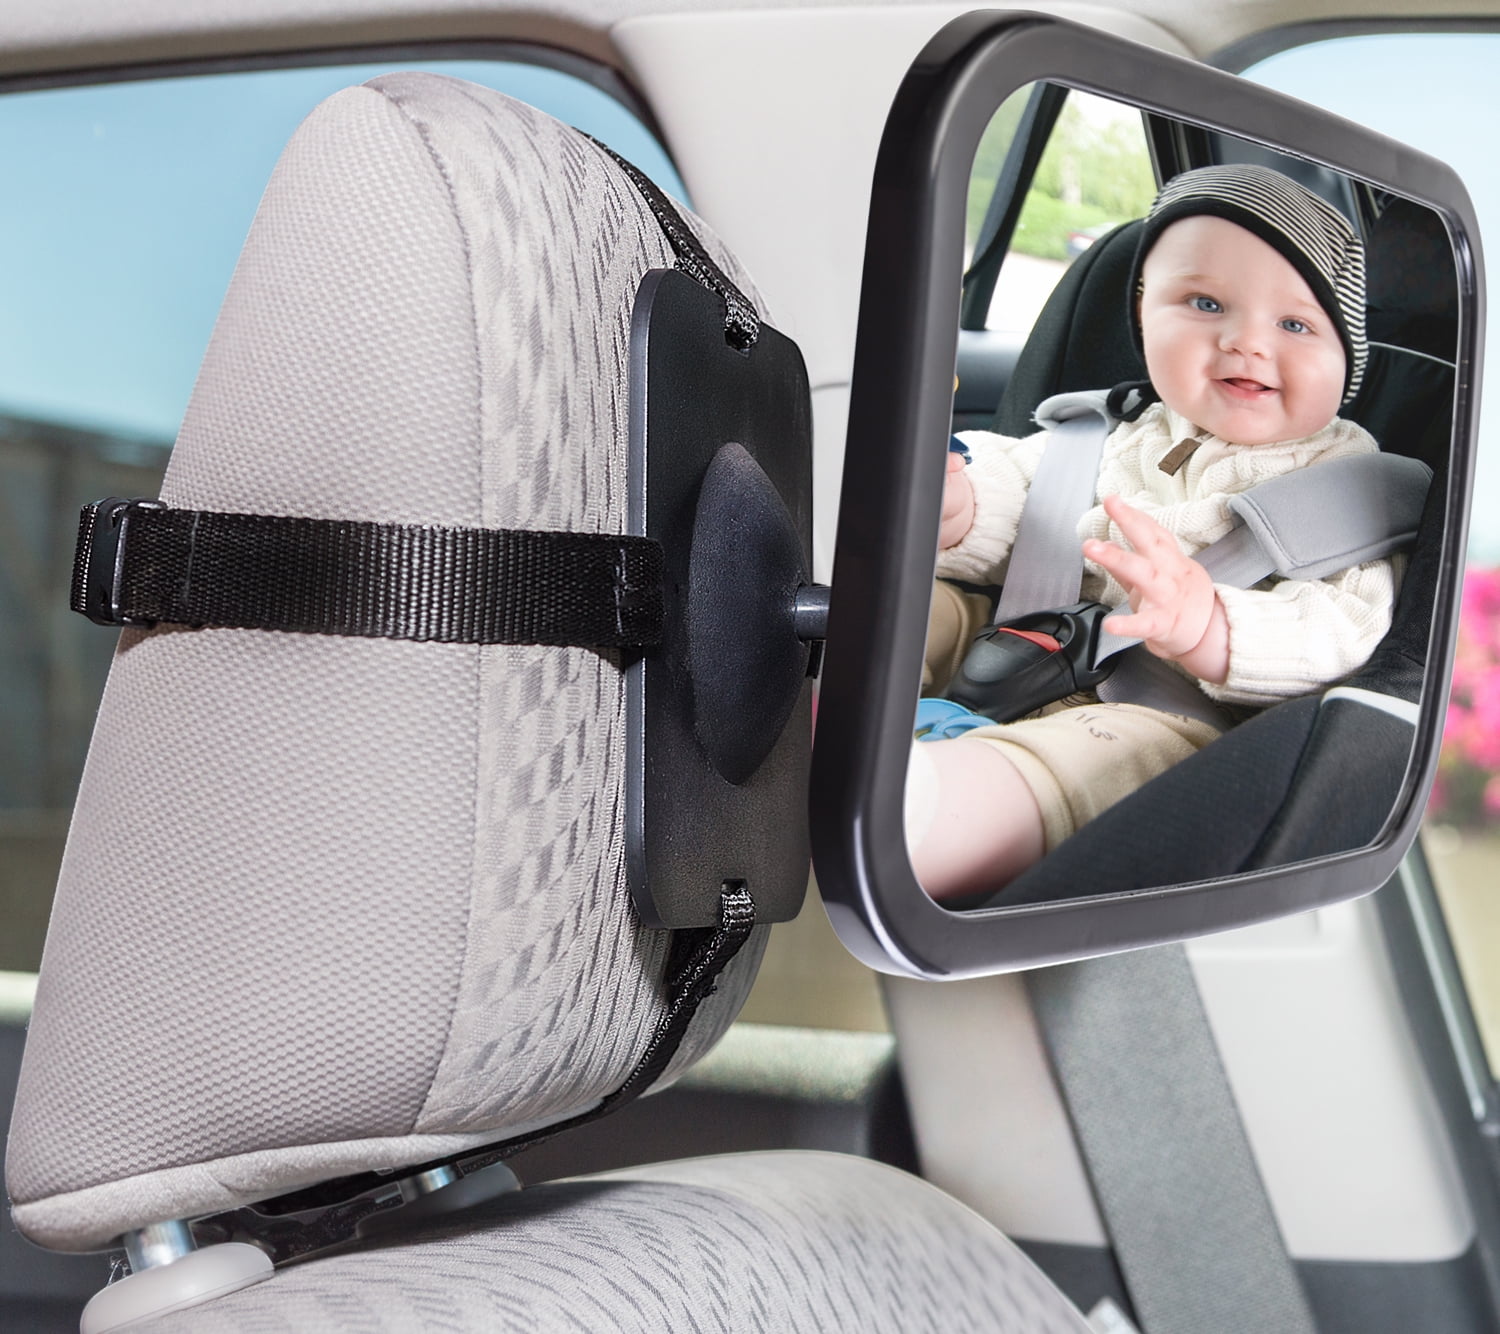 Rear Seat Mirror for Babies Car Mirror Baby Shatterproof Glass Baby Mirror 